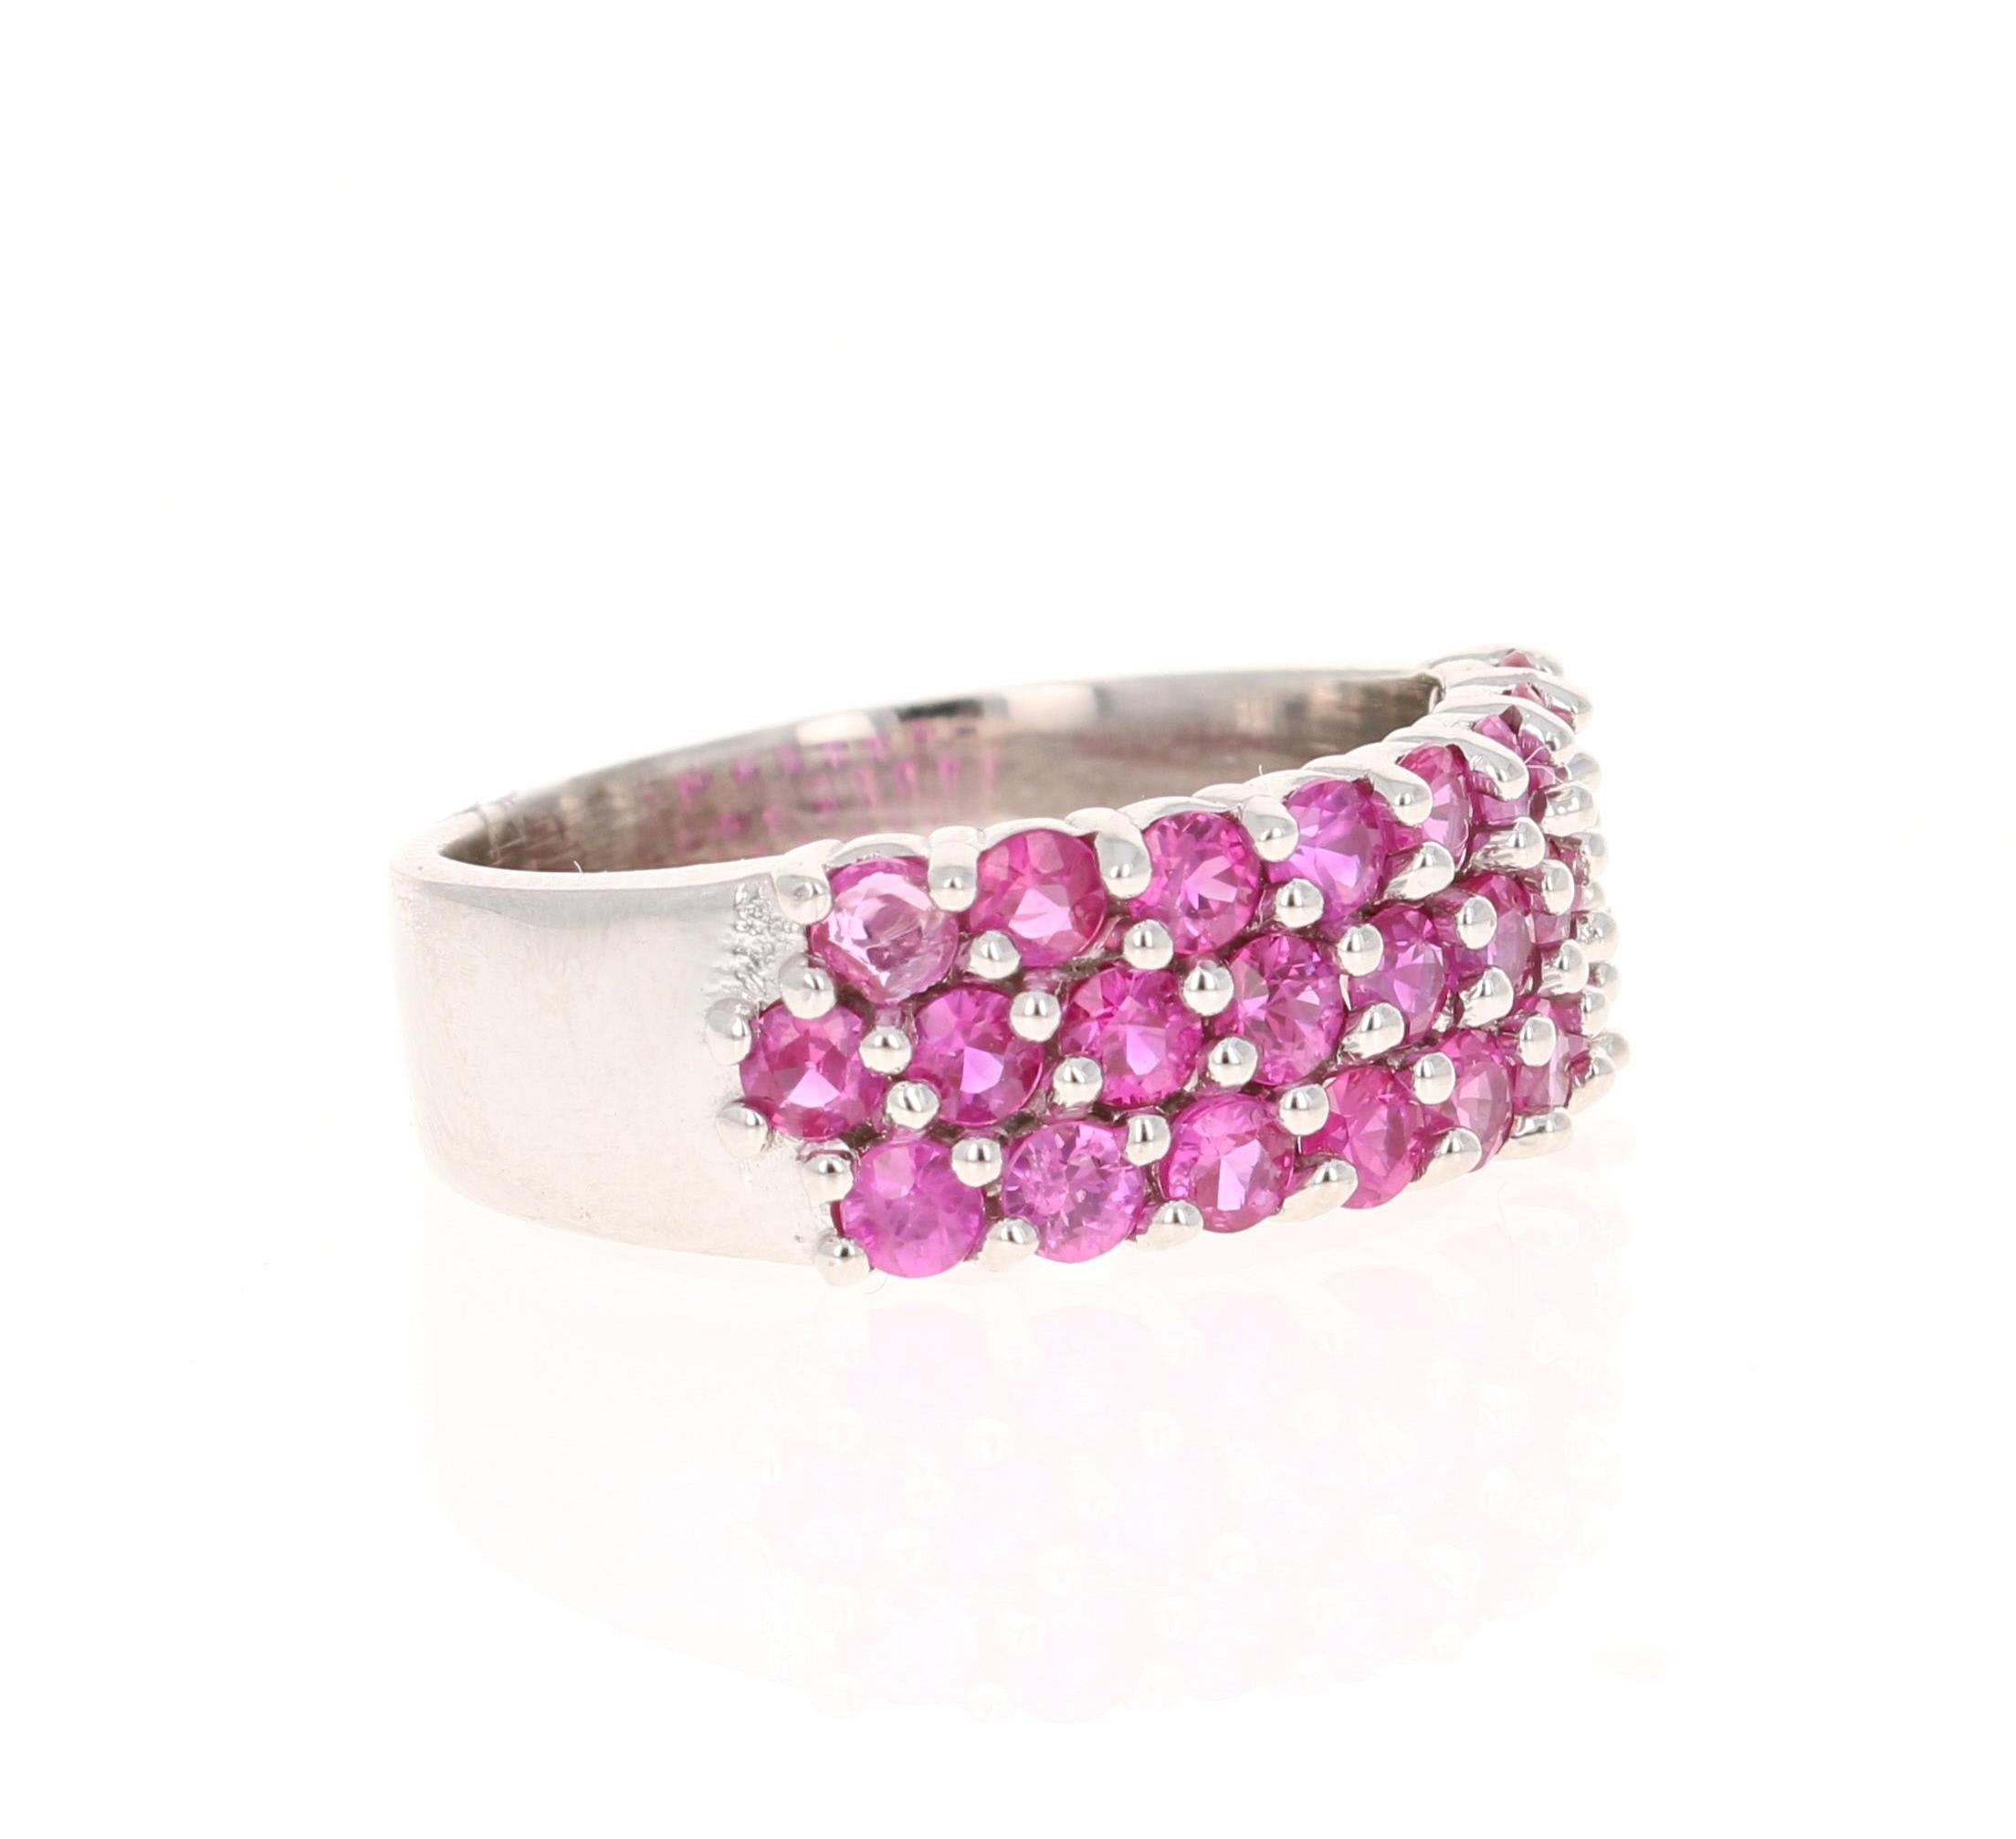 This ring has 25 Natural Round Cut Dark Pink Sapphires that weigh 1.68 Carats. 

Crafted in 14 Karat White Gold and weighs approximately 5.0 grams 

The ring is a size 7 and can be re-sized at no additional charge!